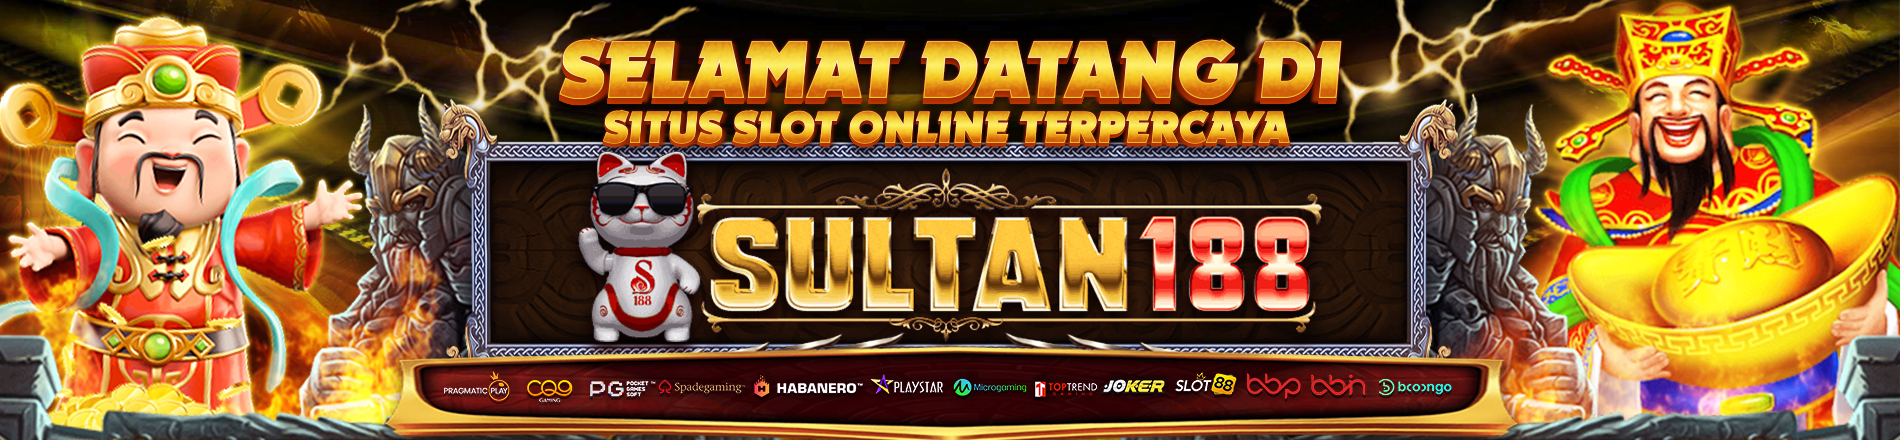 WELCOME SULTAN188